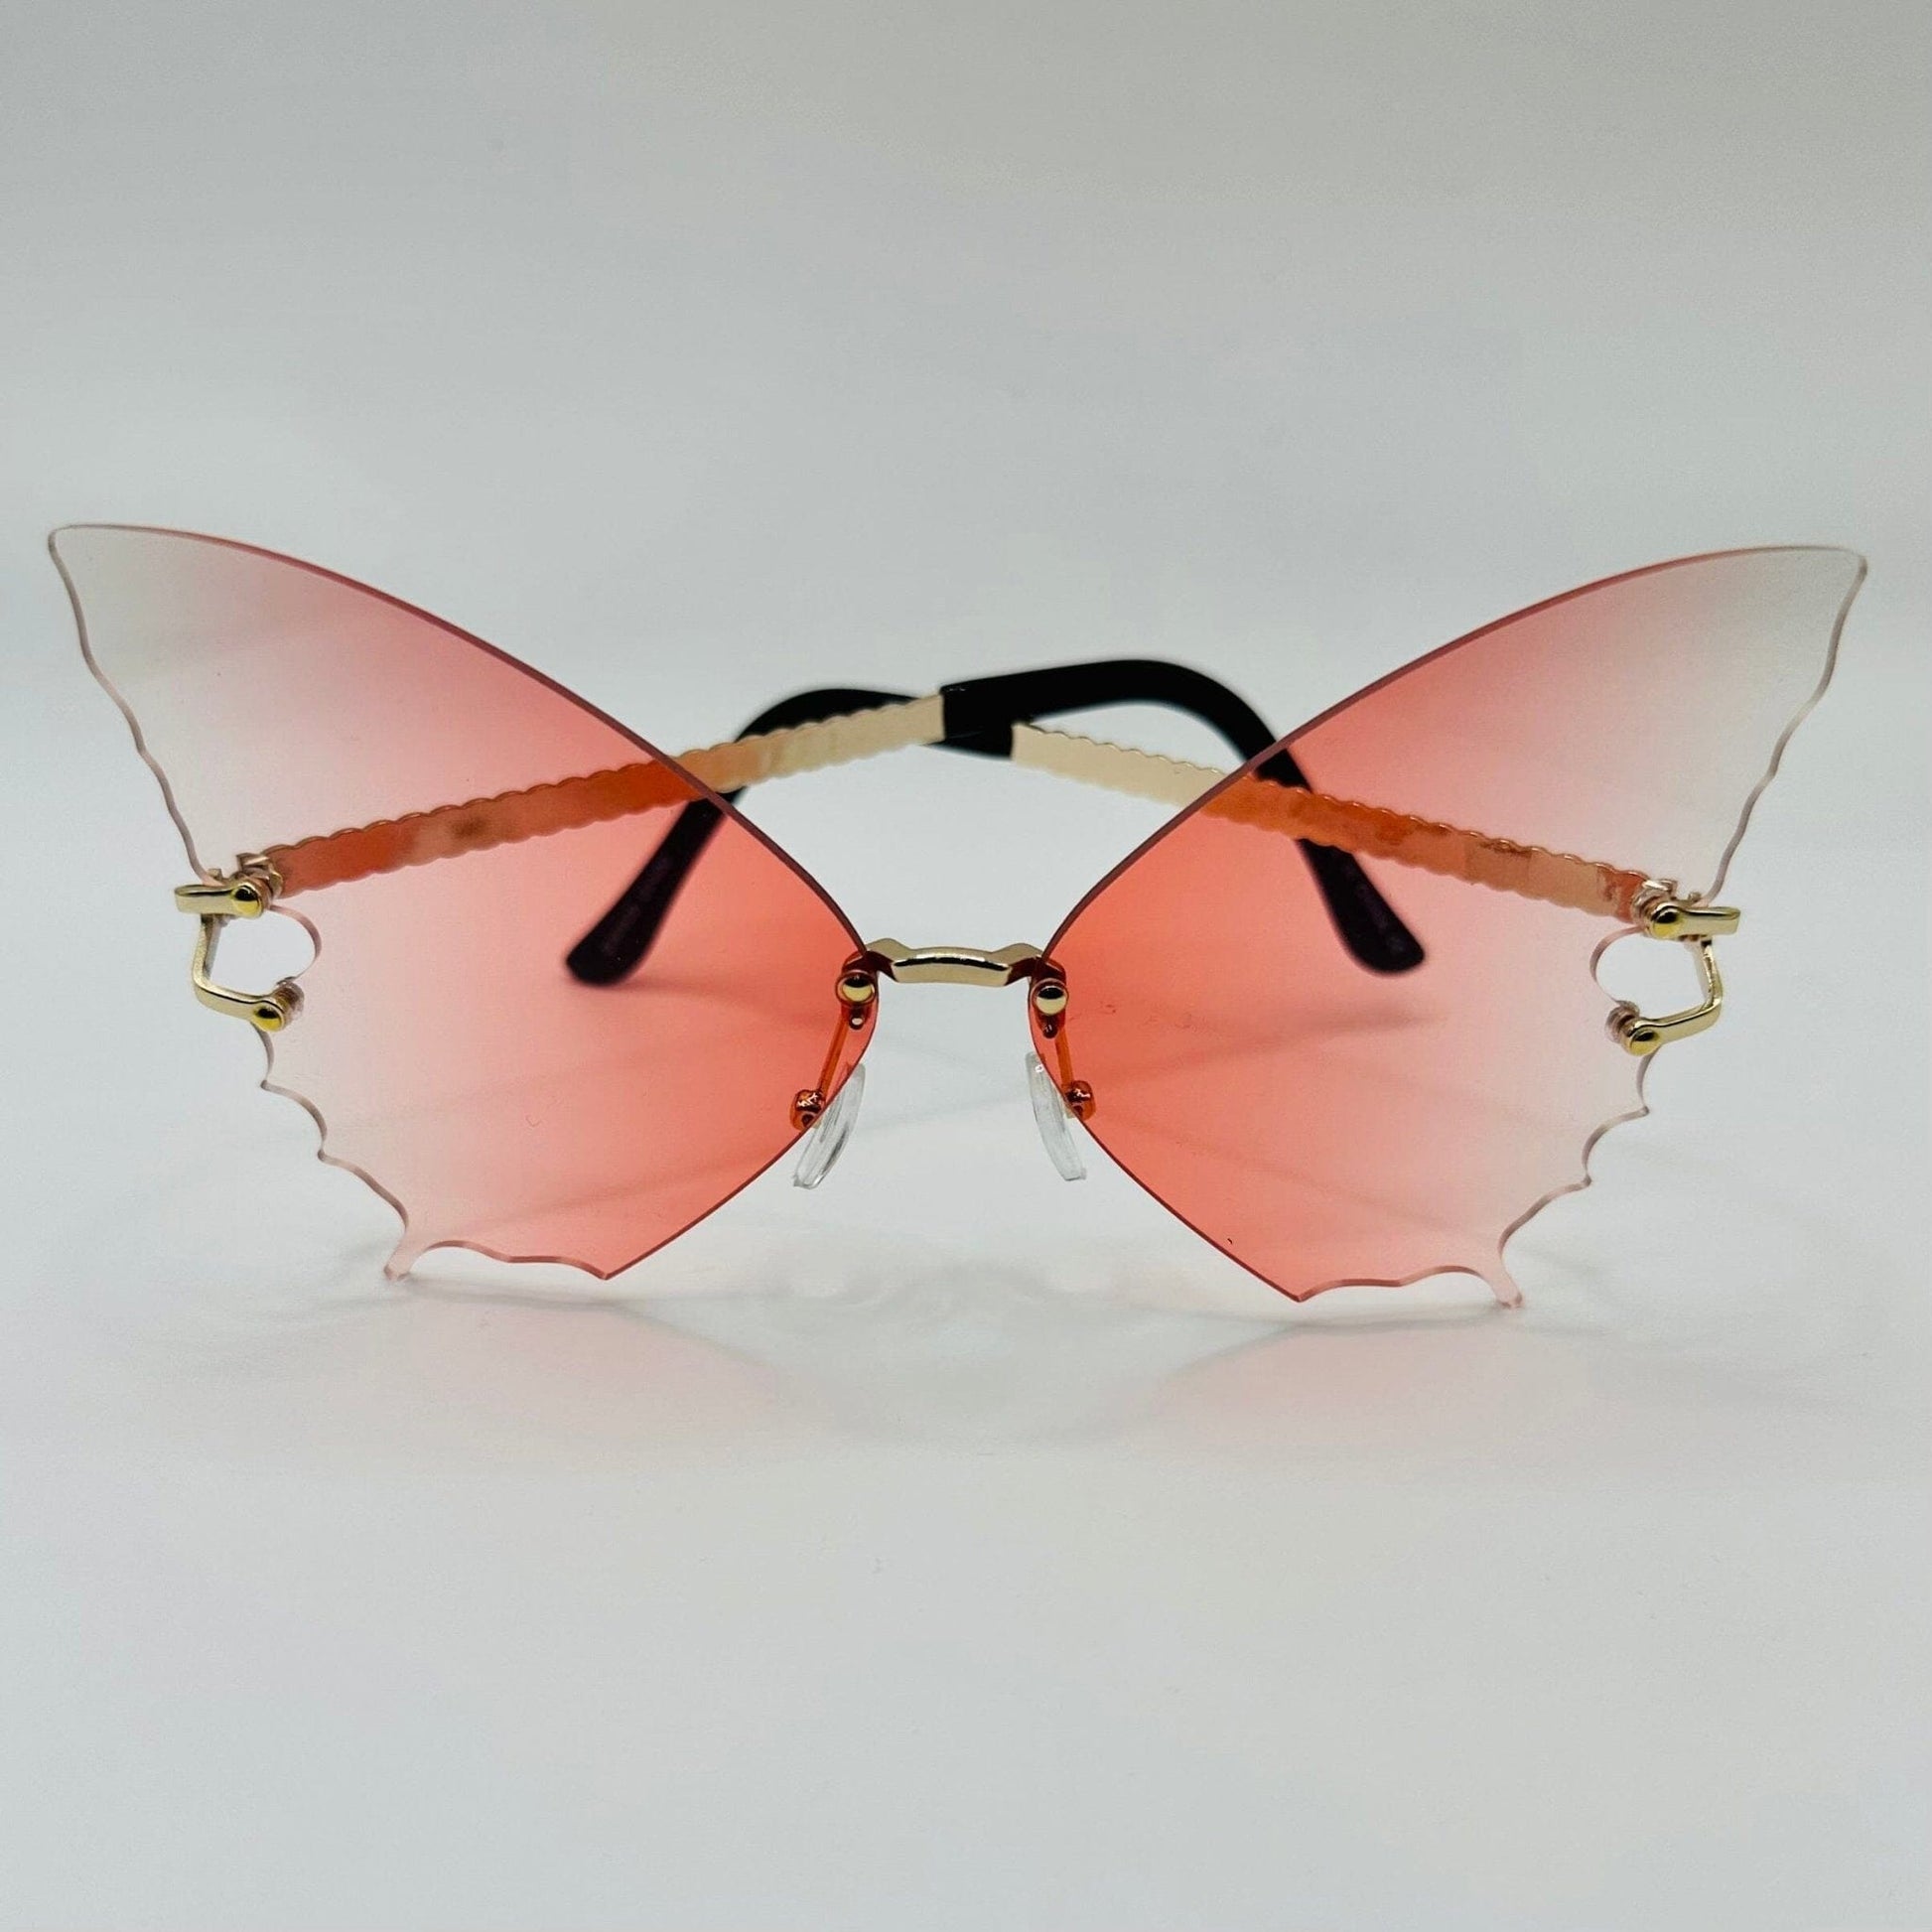 Variety of Ombre Frames Eyewear Shun Melson Butterfly Pink Ombre 